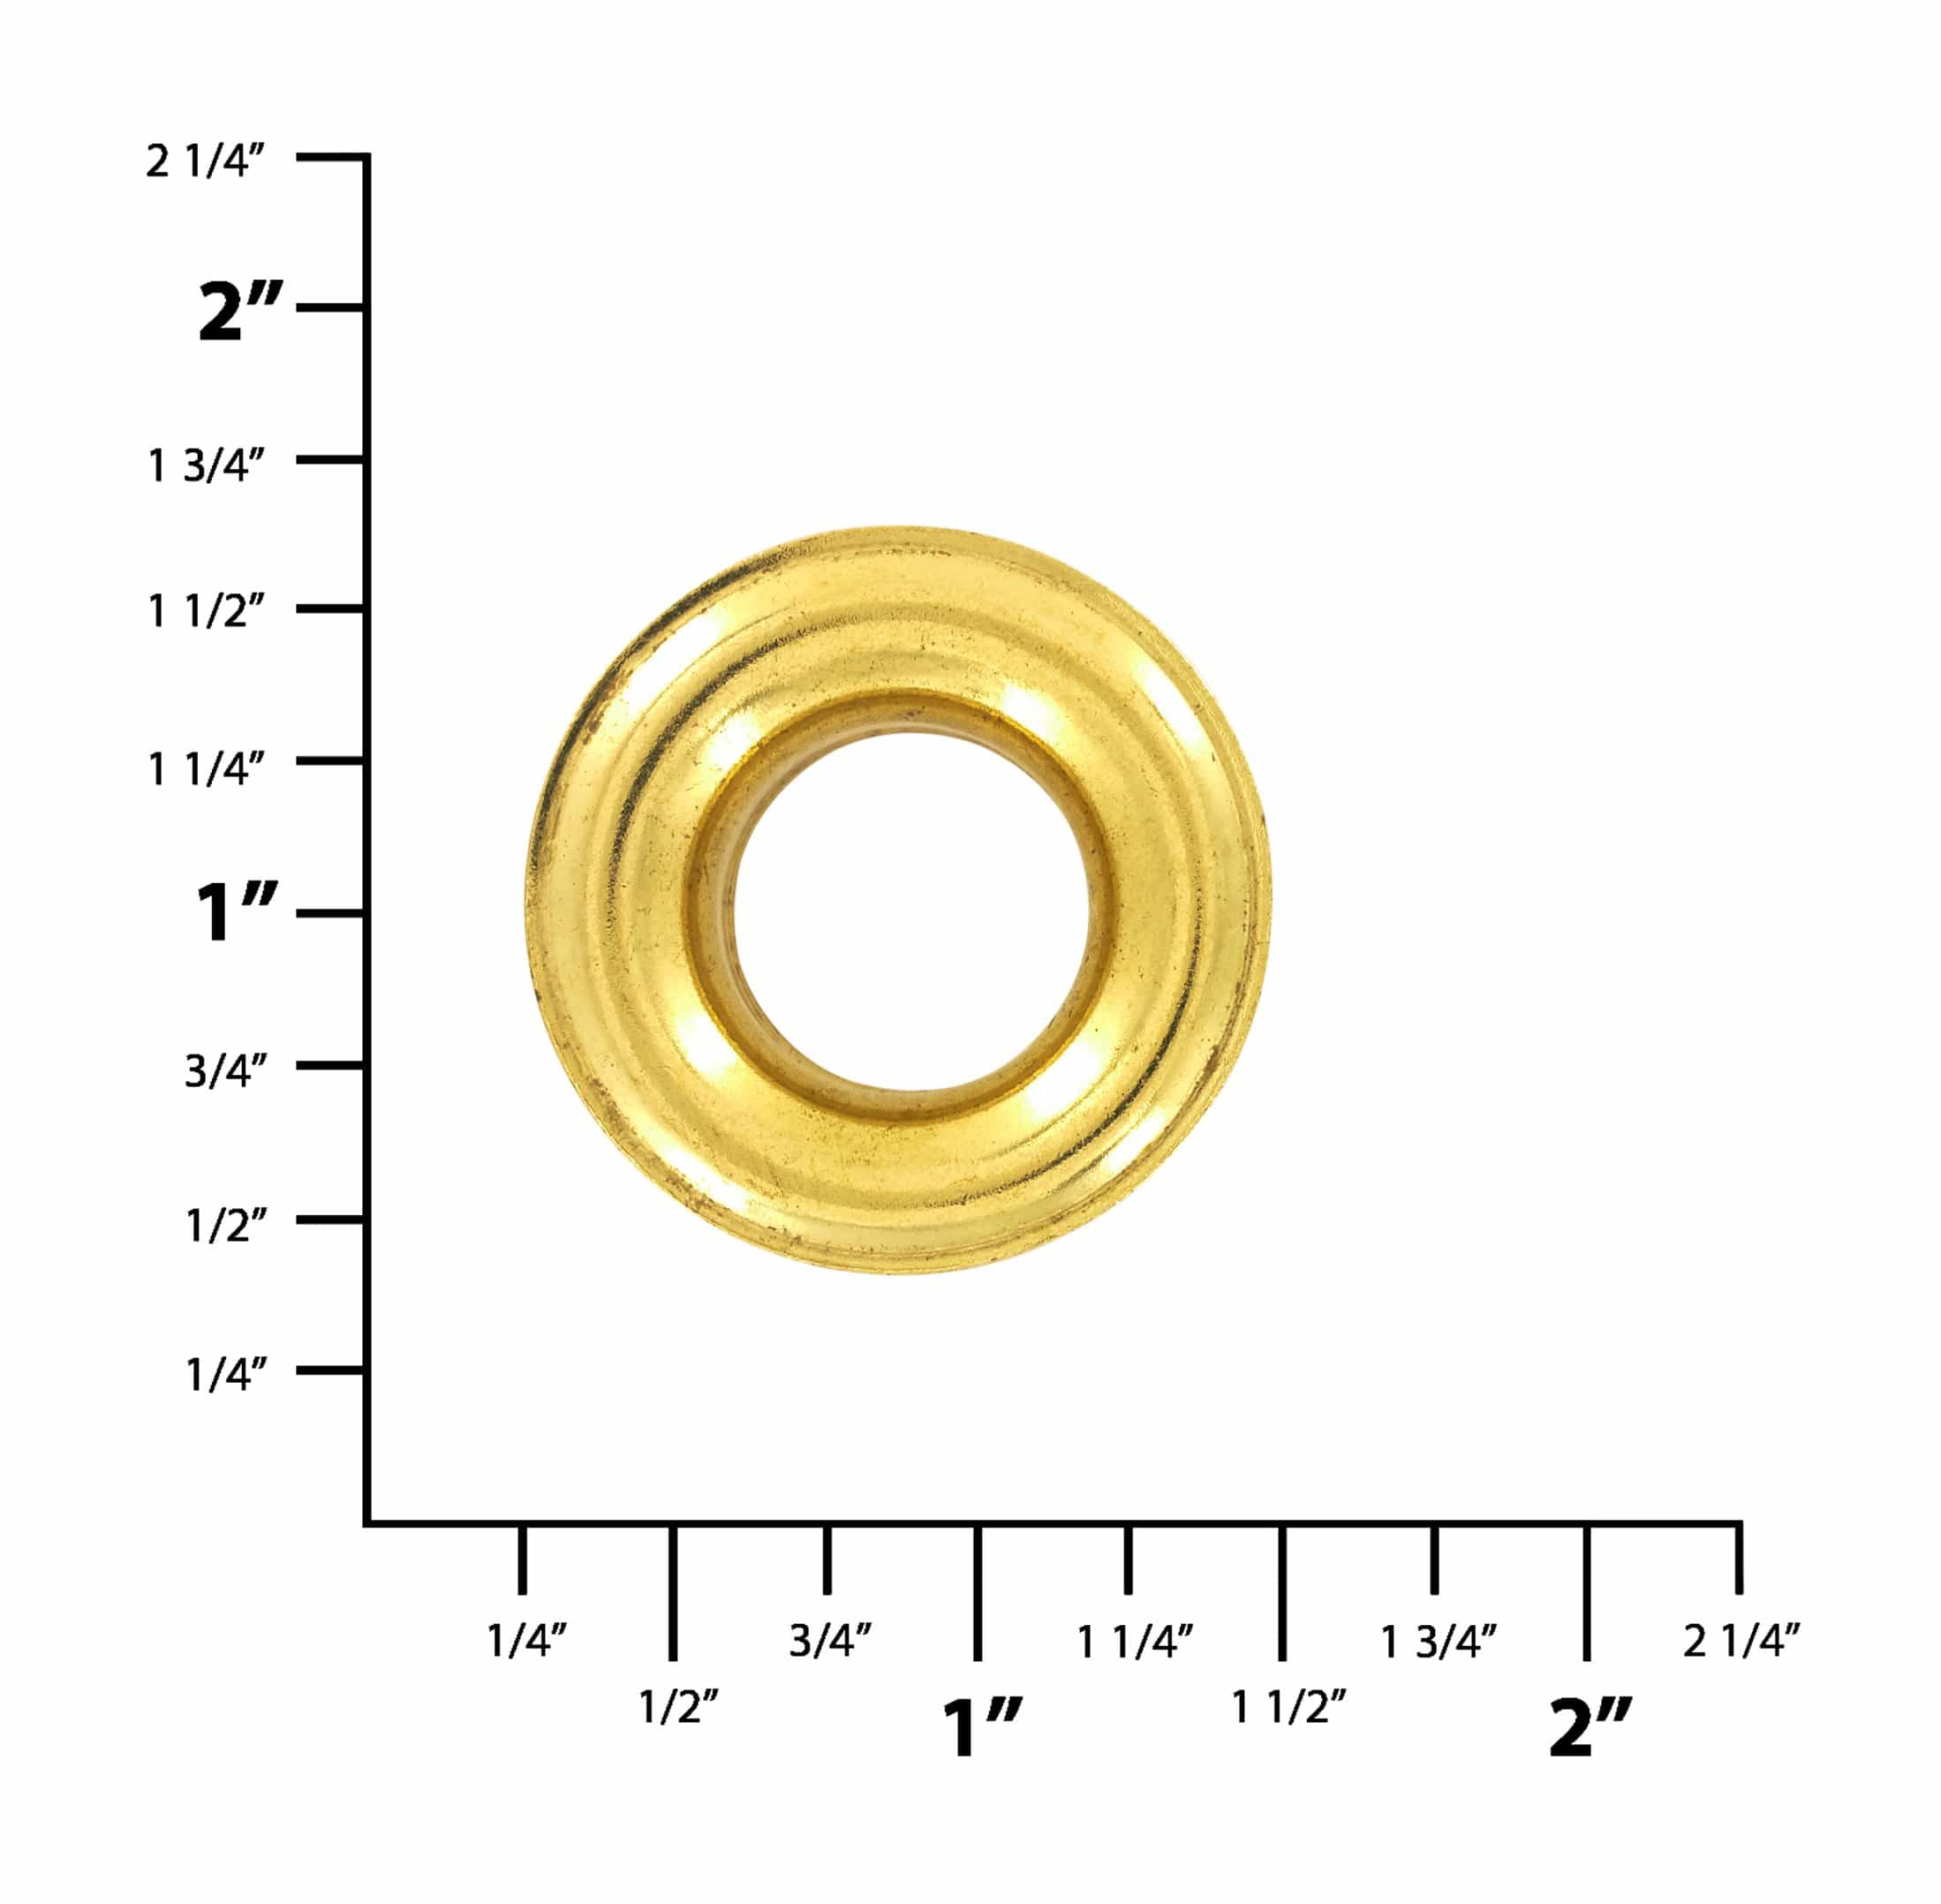 Ohio Travel Bag Fasteners #5 Brass, Grommet with Washer, Solid Brass, #GROM-5-SB GROM-5-SB